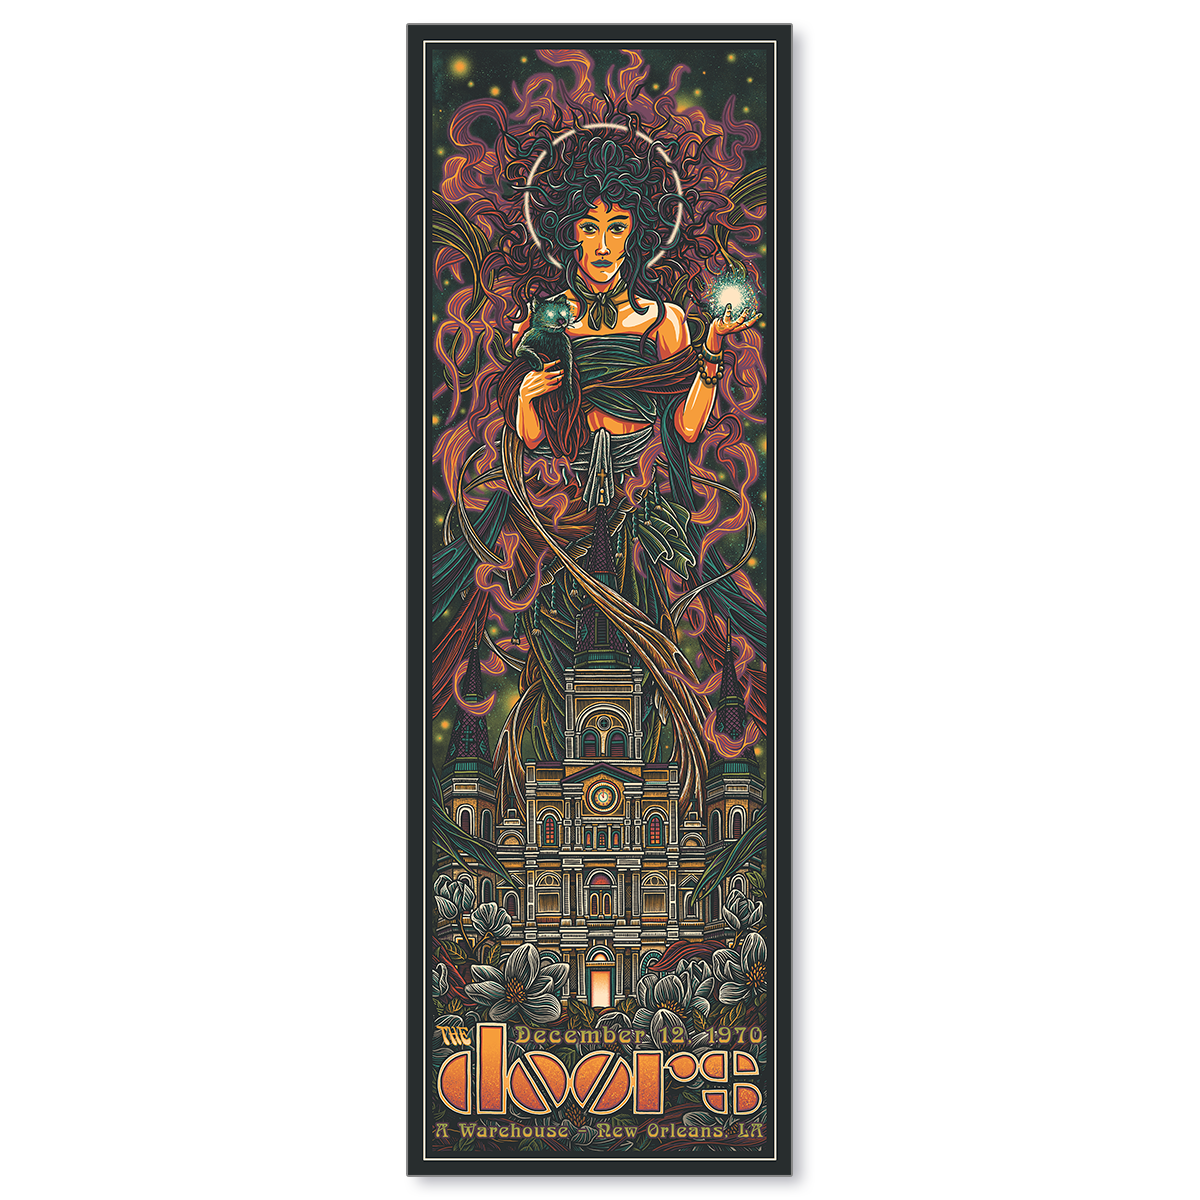 The Doors New Orleans 1970 by Luke Martin (Main Edition Foil)